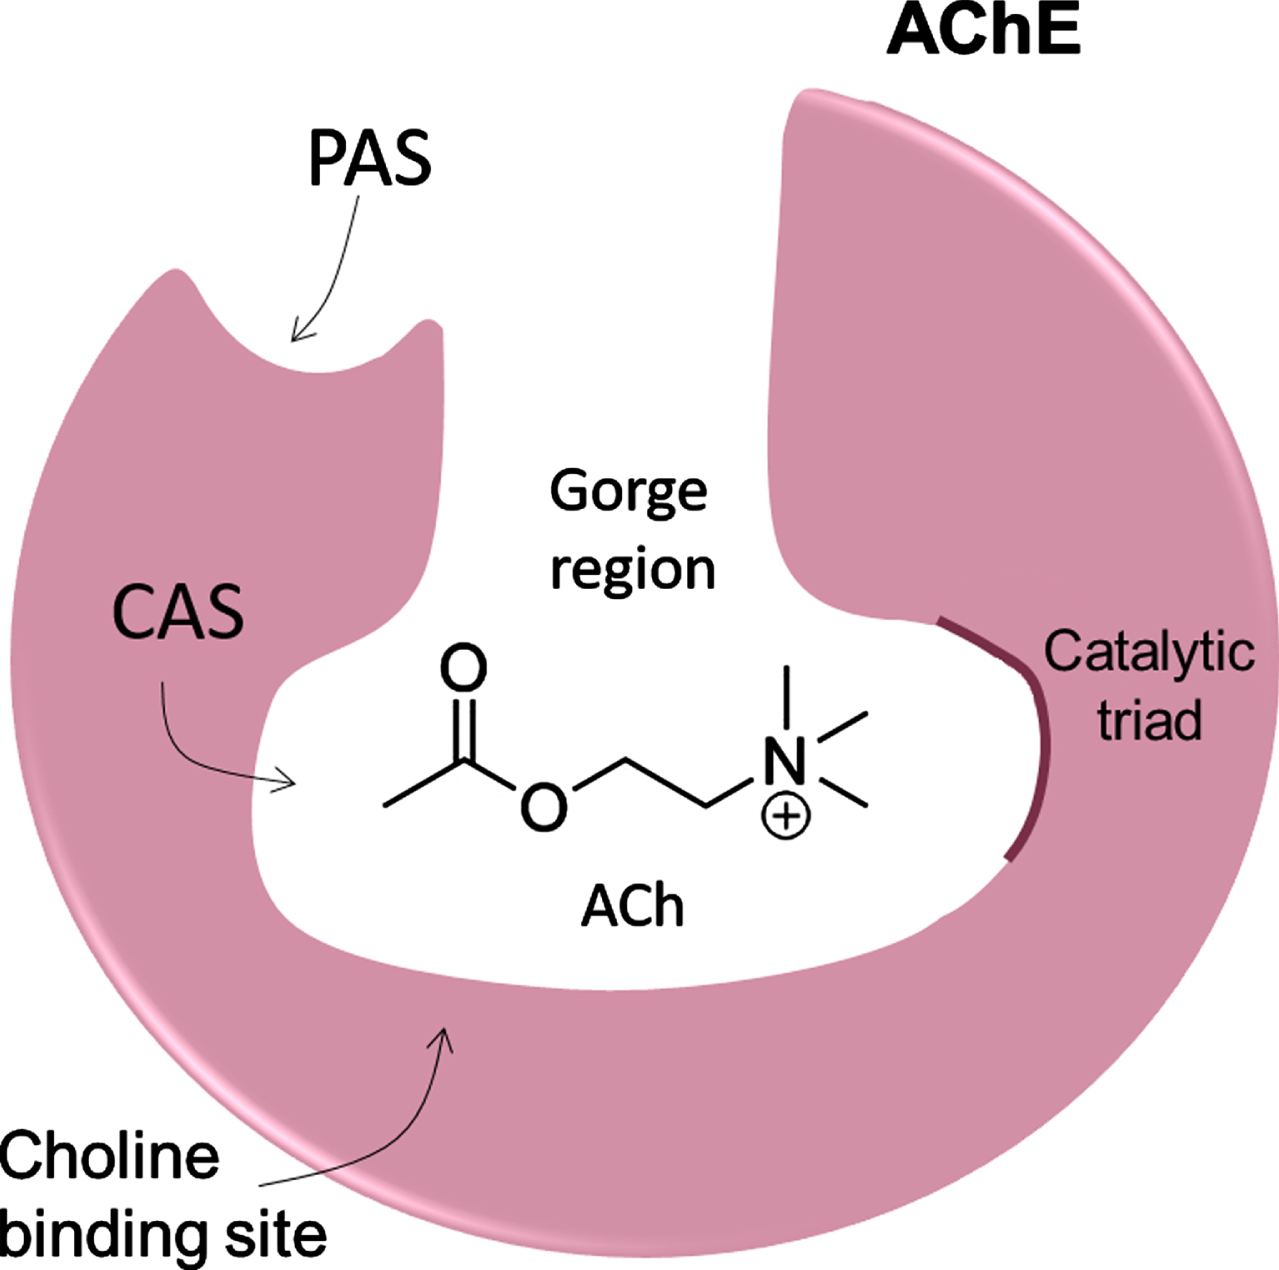 Schematic structure of AChE showing the gorge region, active catalytic site (CAS), and the peripheral anionic site (PAS).